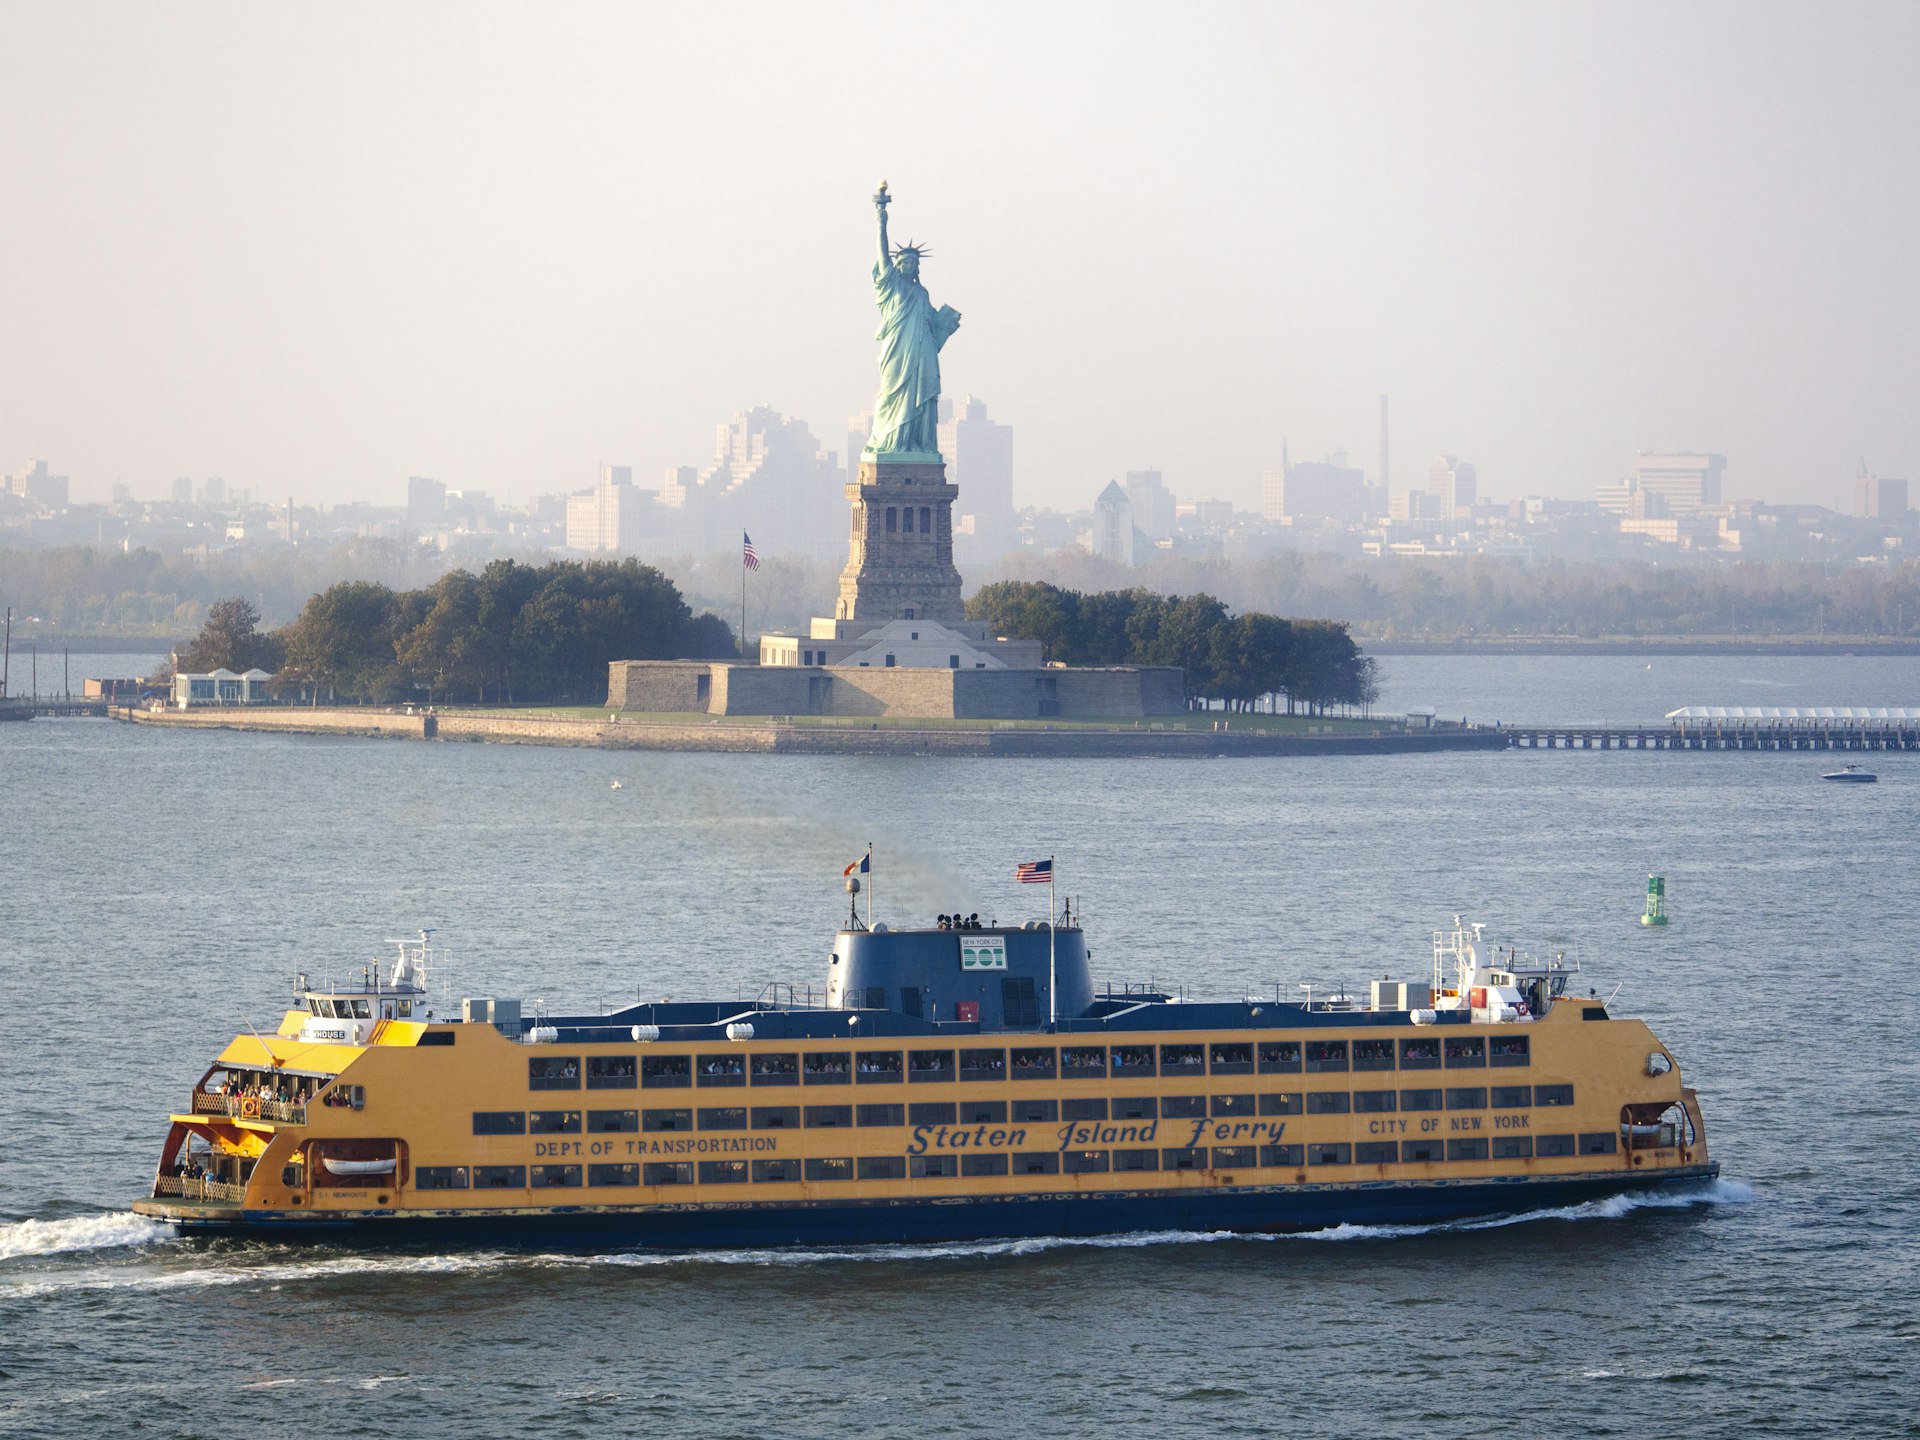 Ferry passing the Statue of Liberty